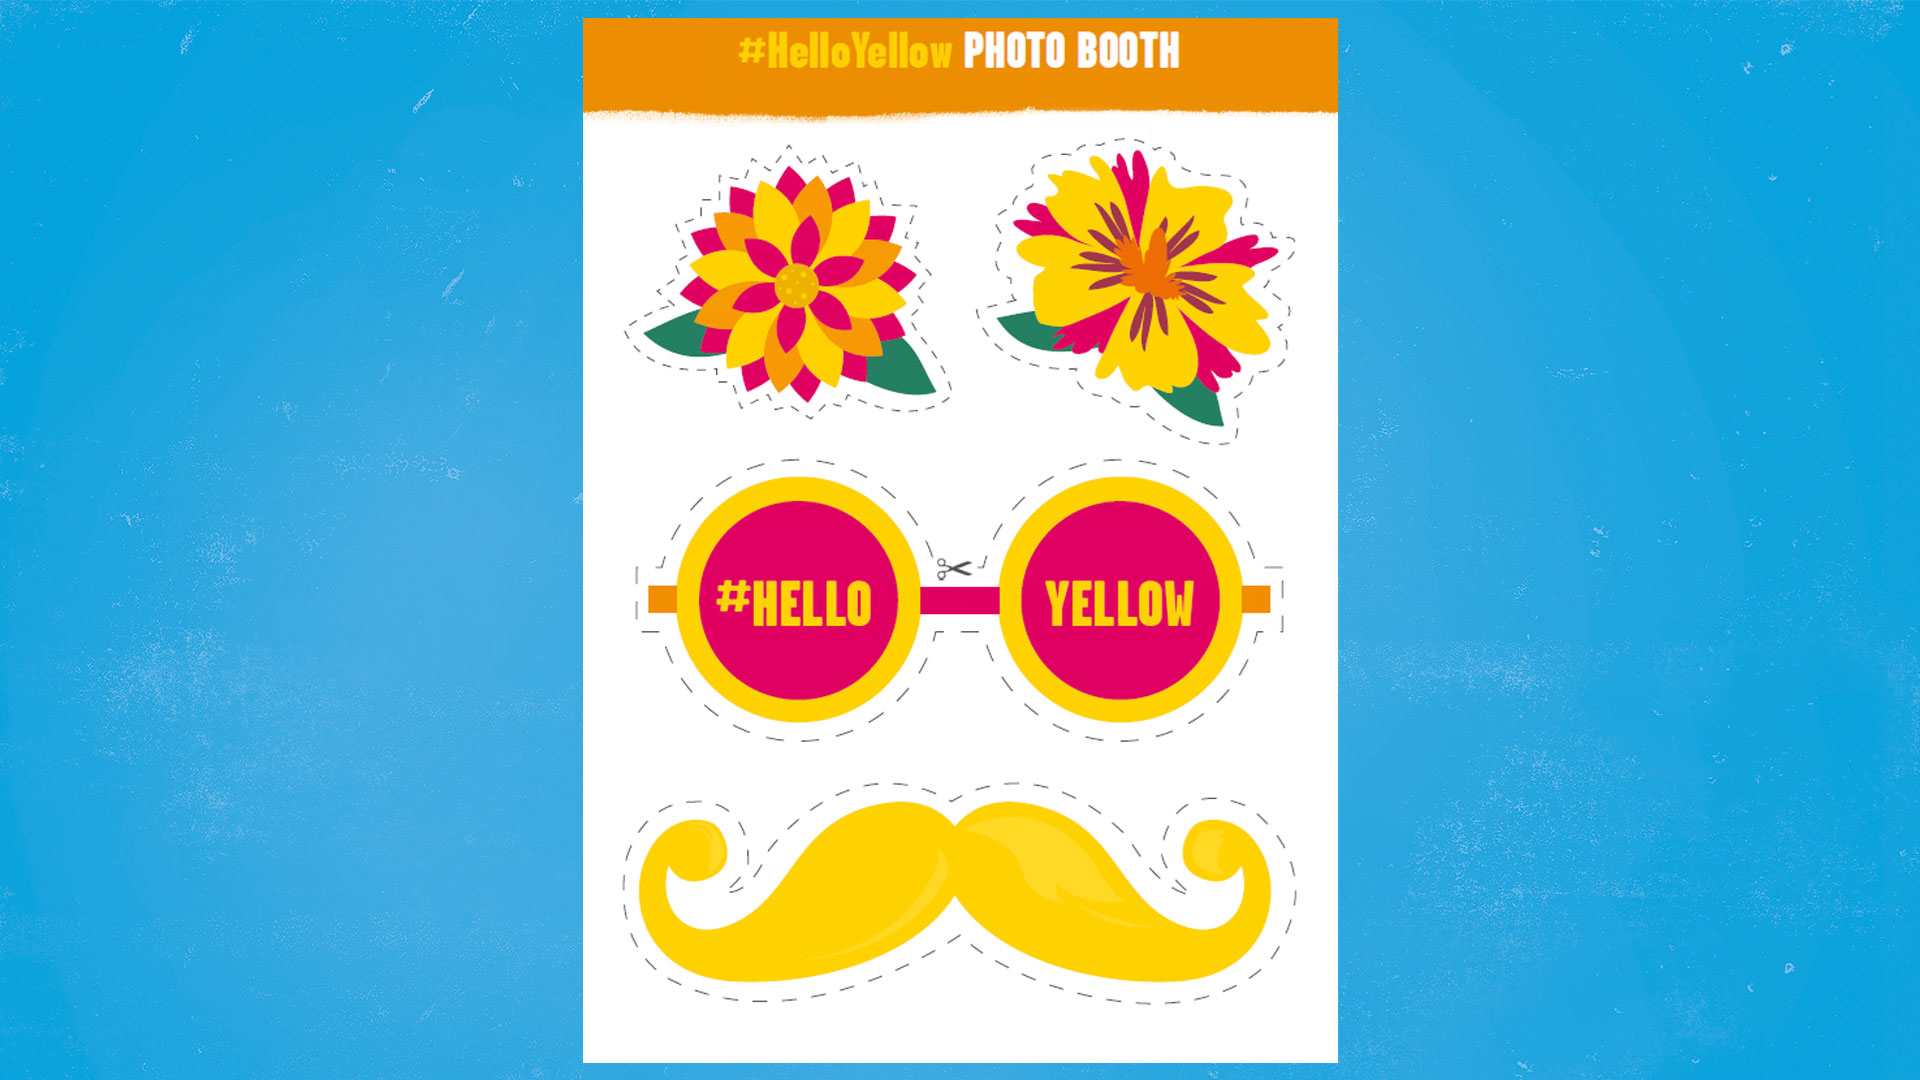 An image of #HelloYellow photobooth props including glasses, moustache and flowers 